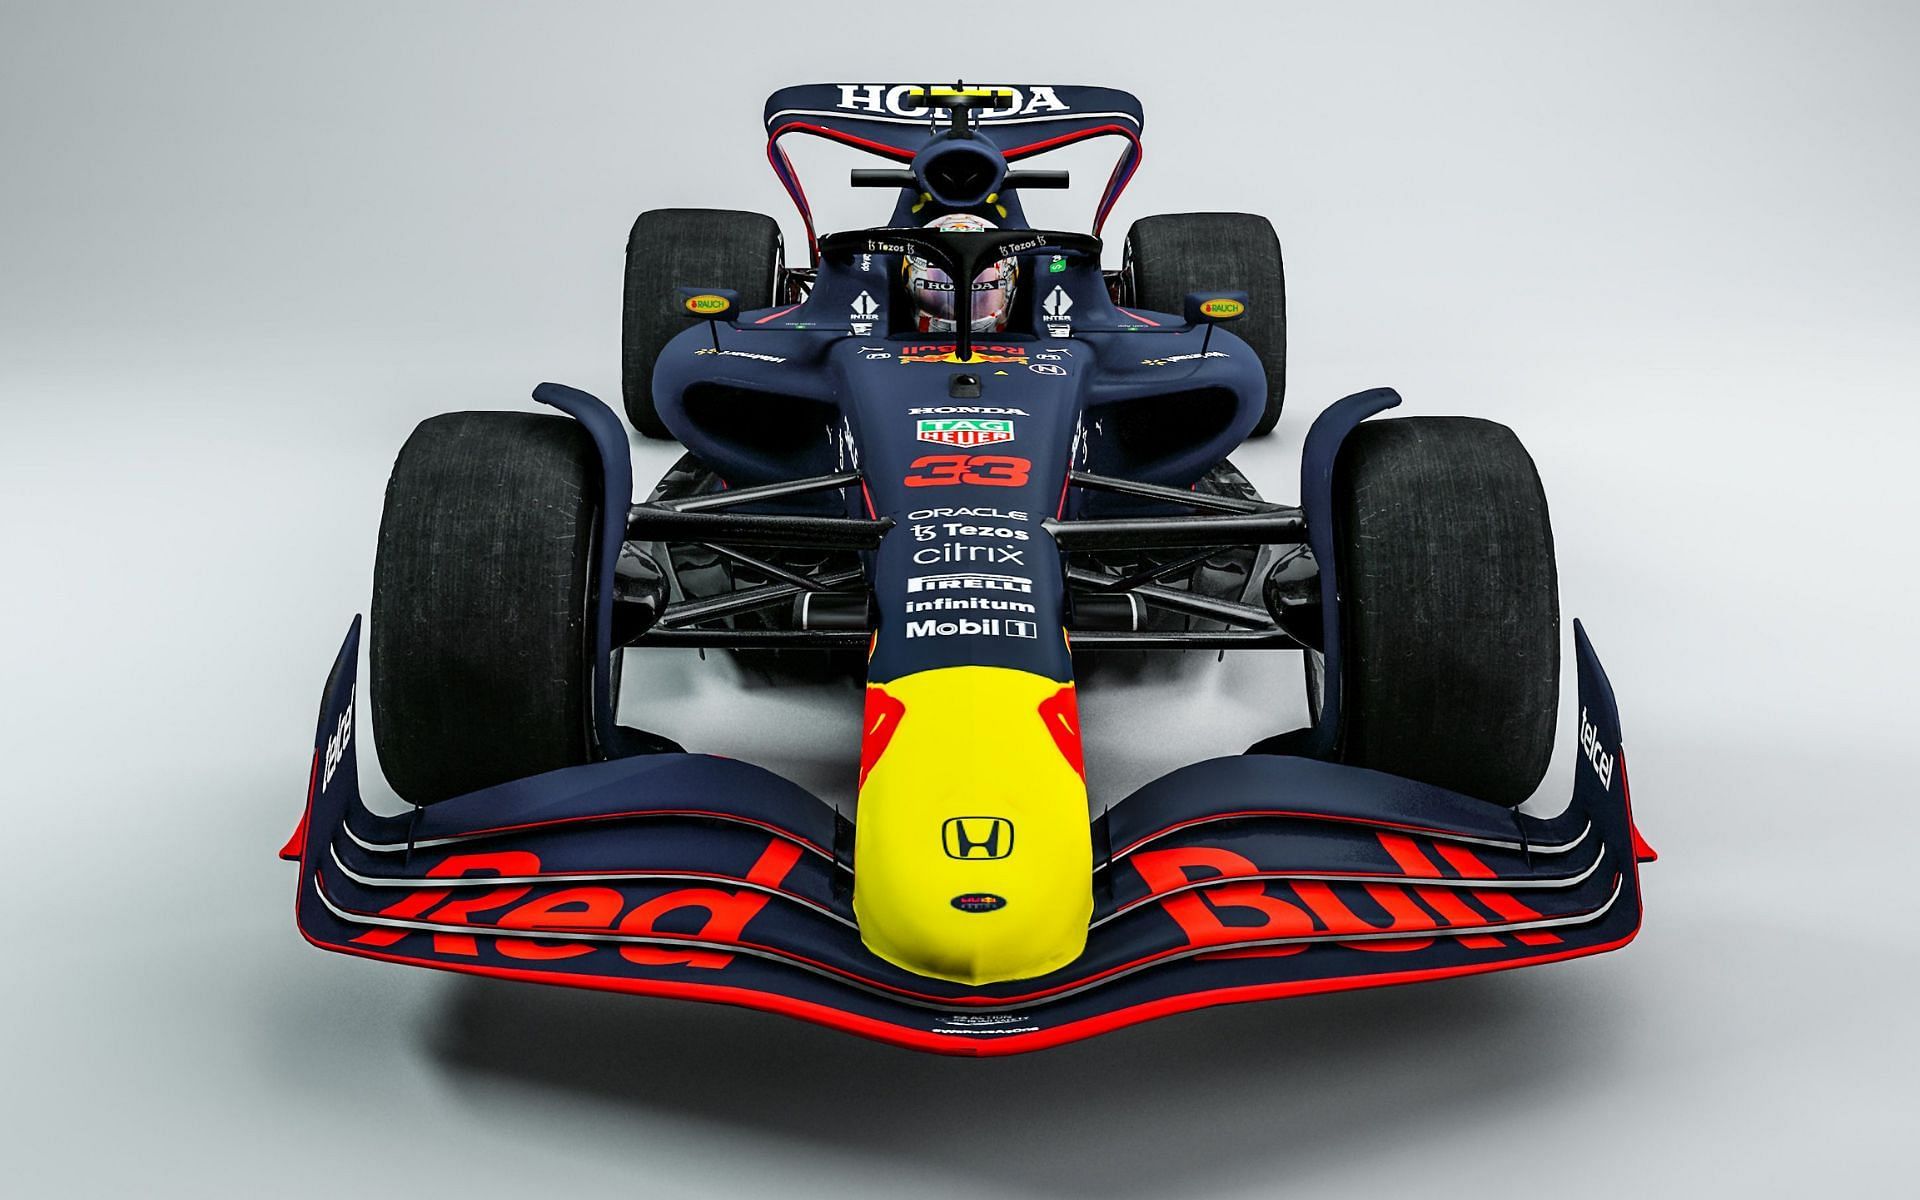 Gallery: Red Bull Launches First Images of RB18 for 2022 Formula 1 Season